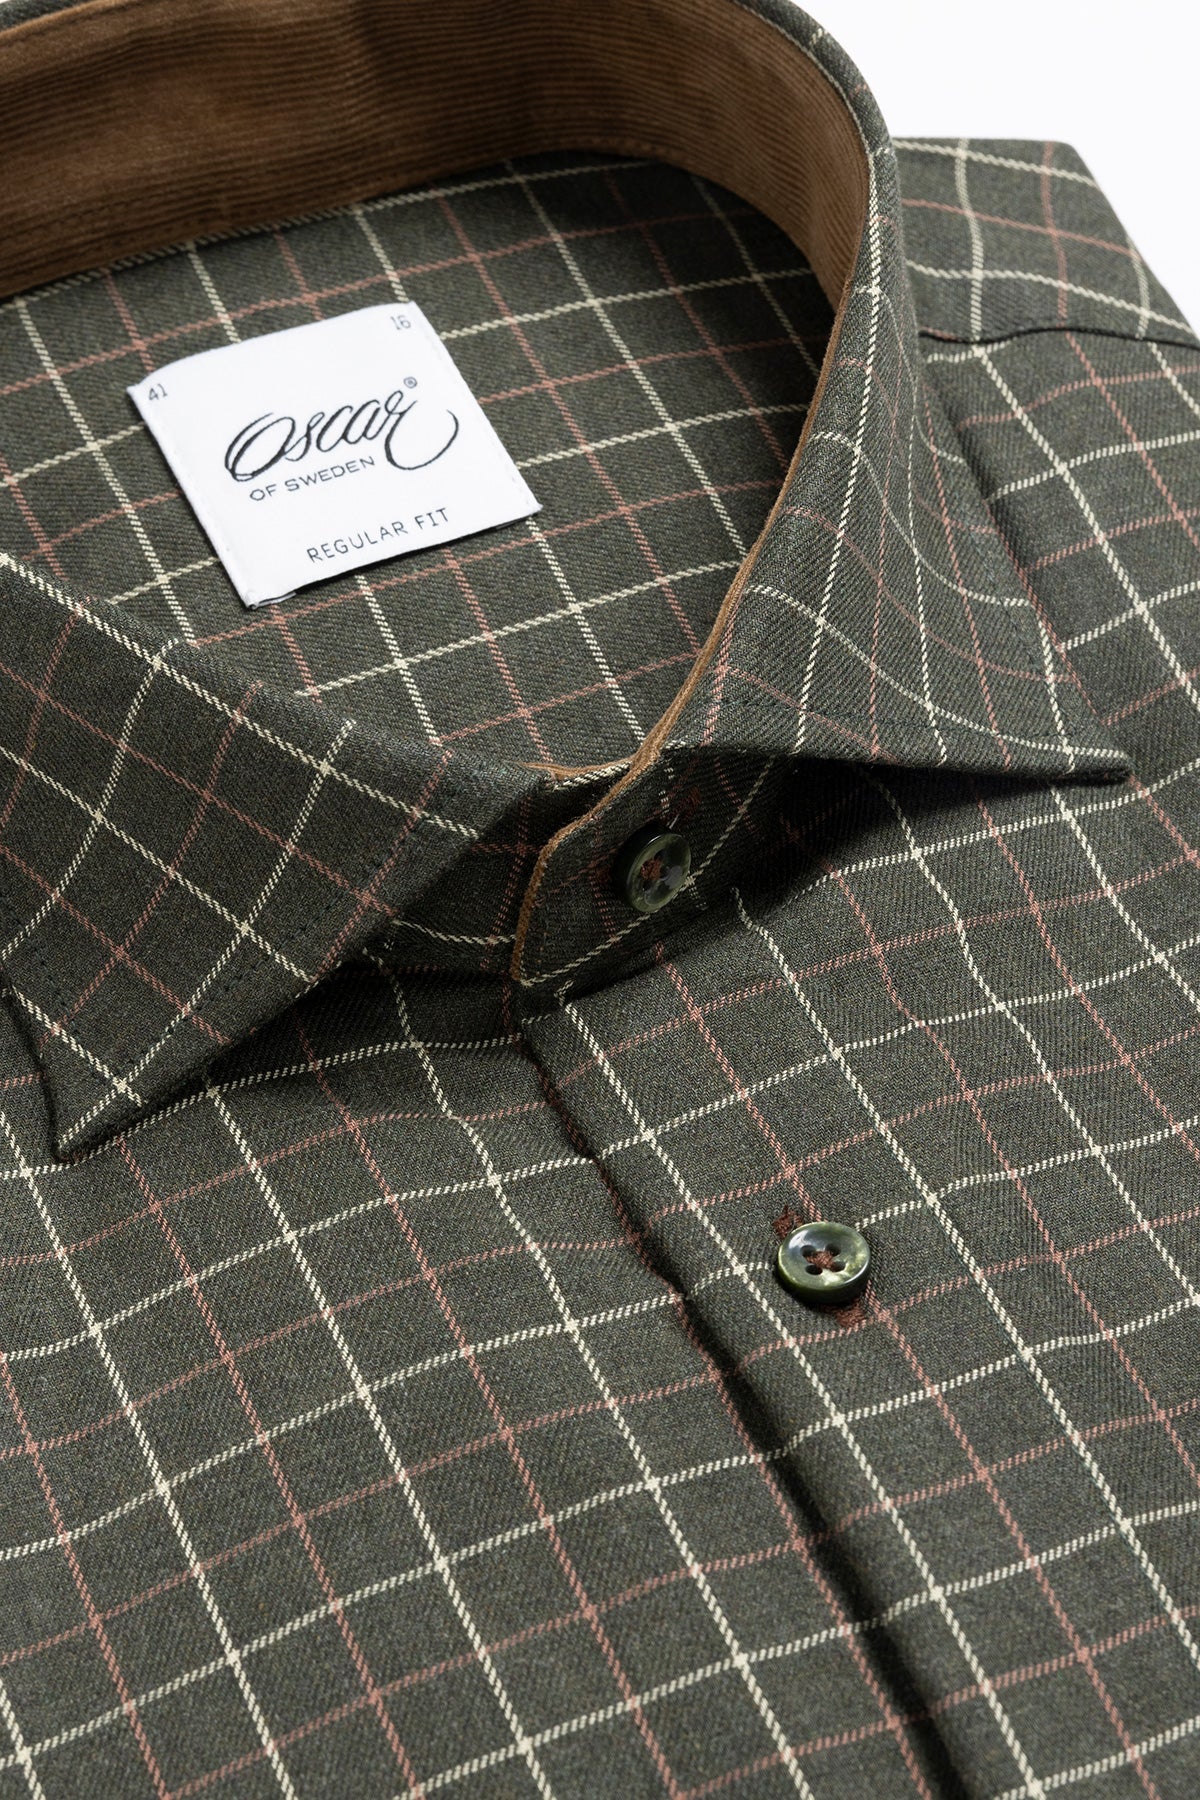 Green check regular fit shirt with contrast details